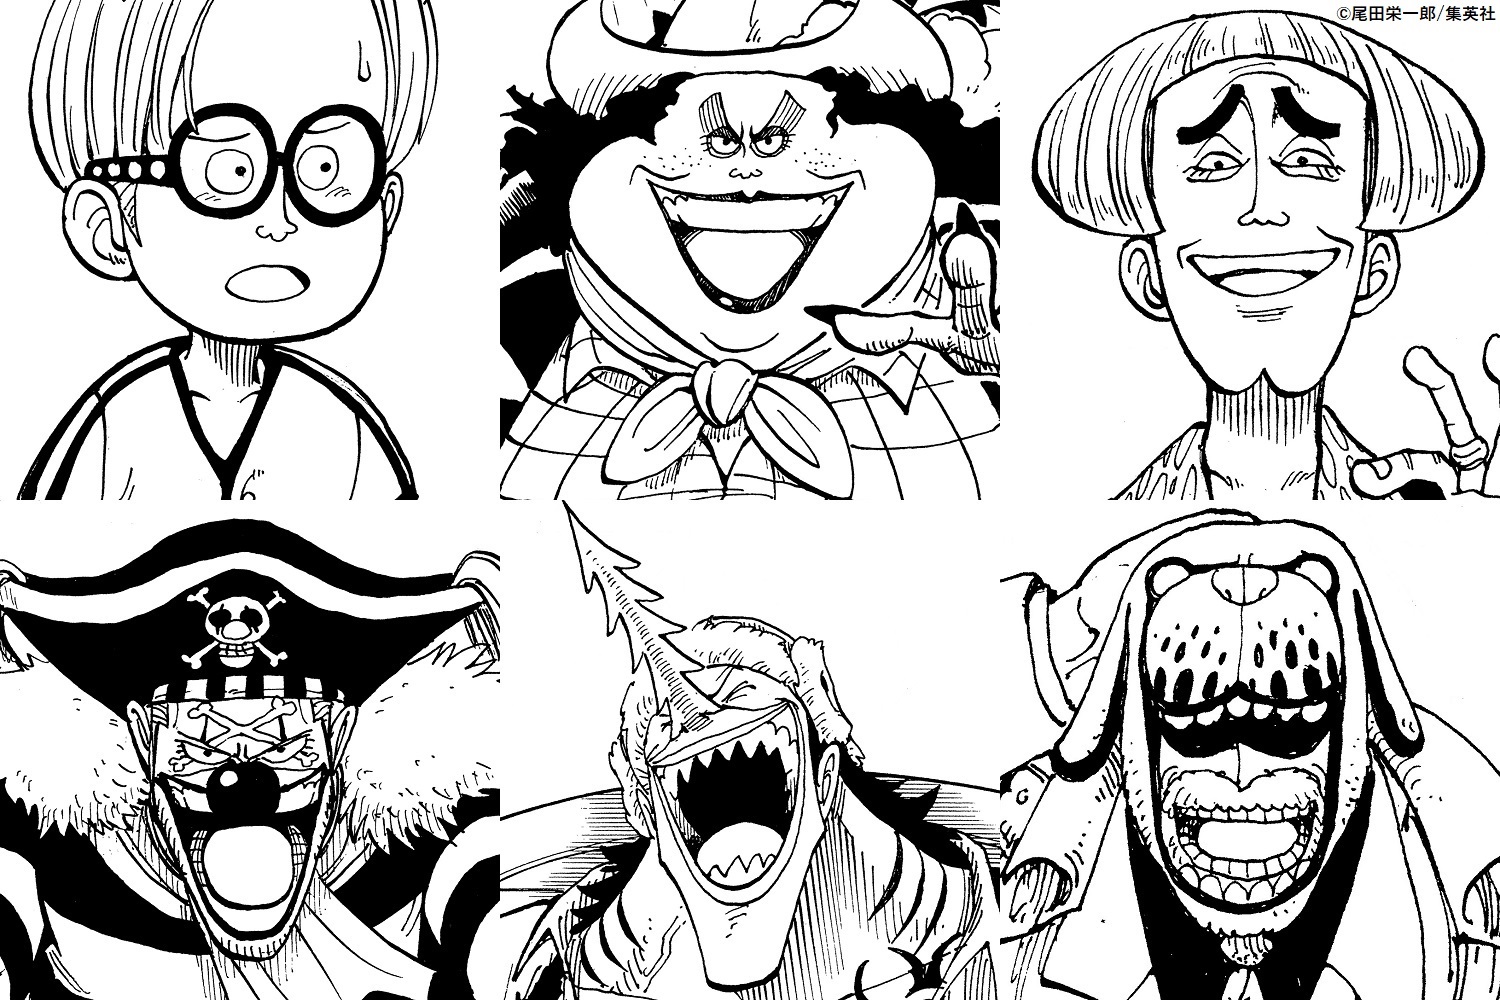 One Piece Live Action' Episodes: How They Connect to the Manga and